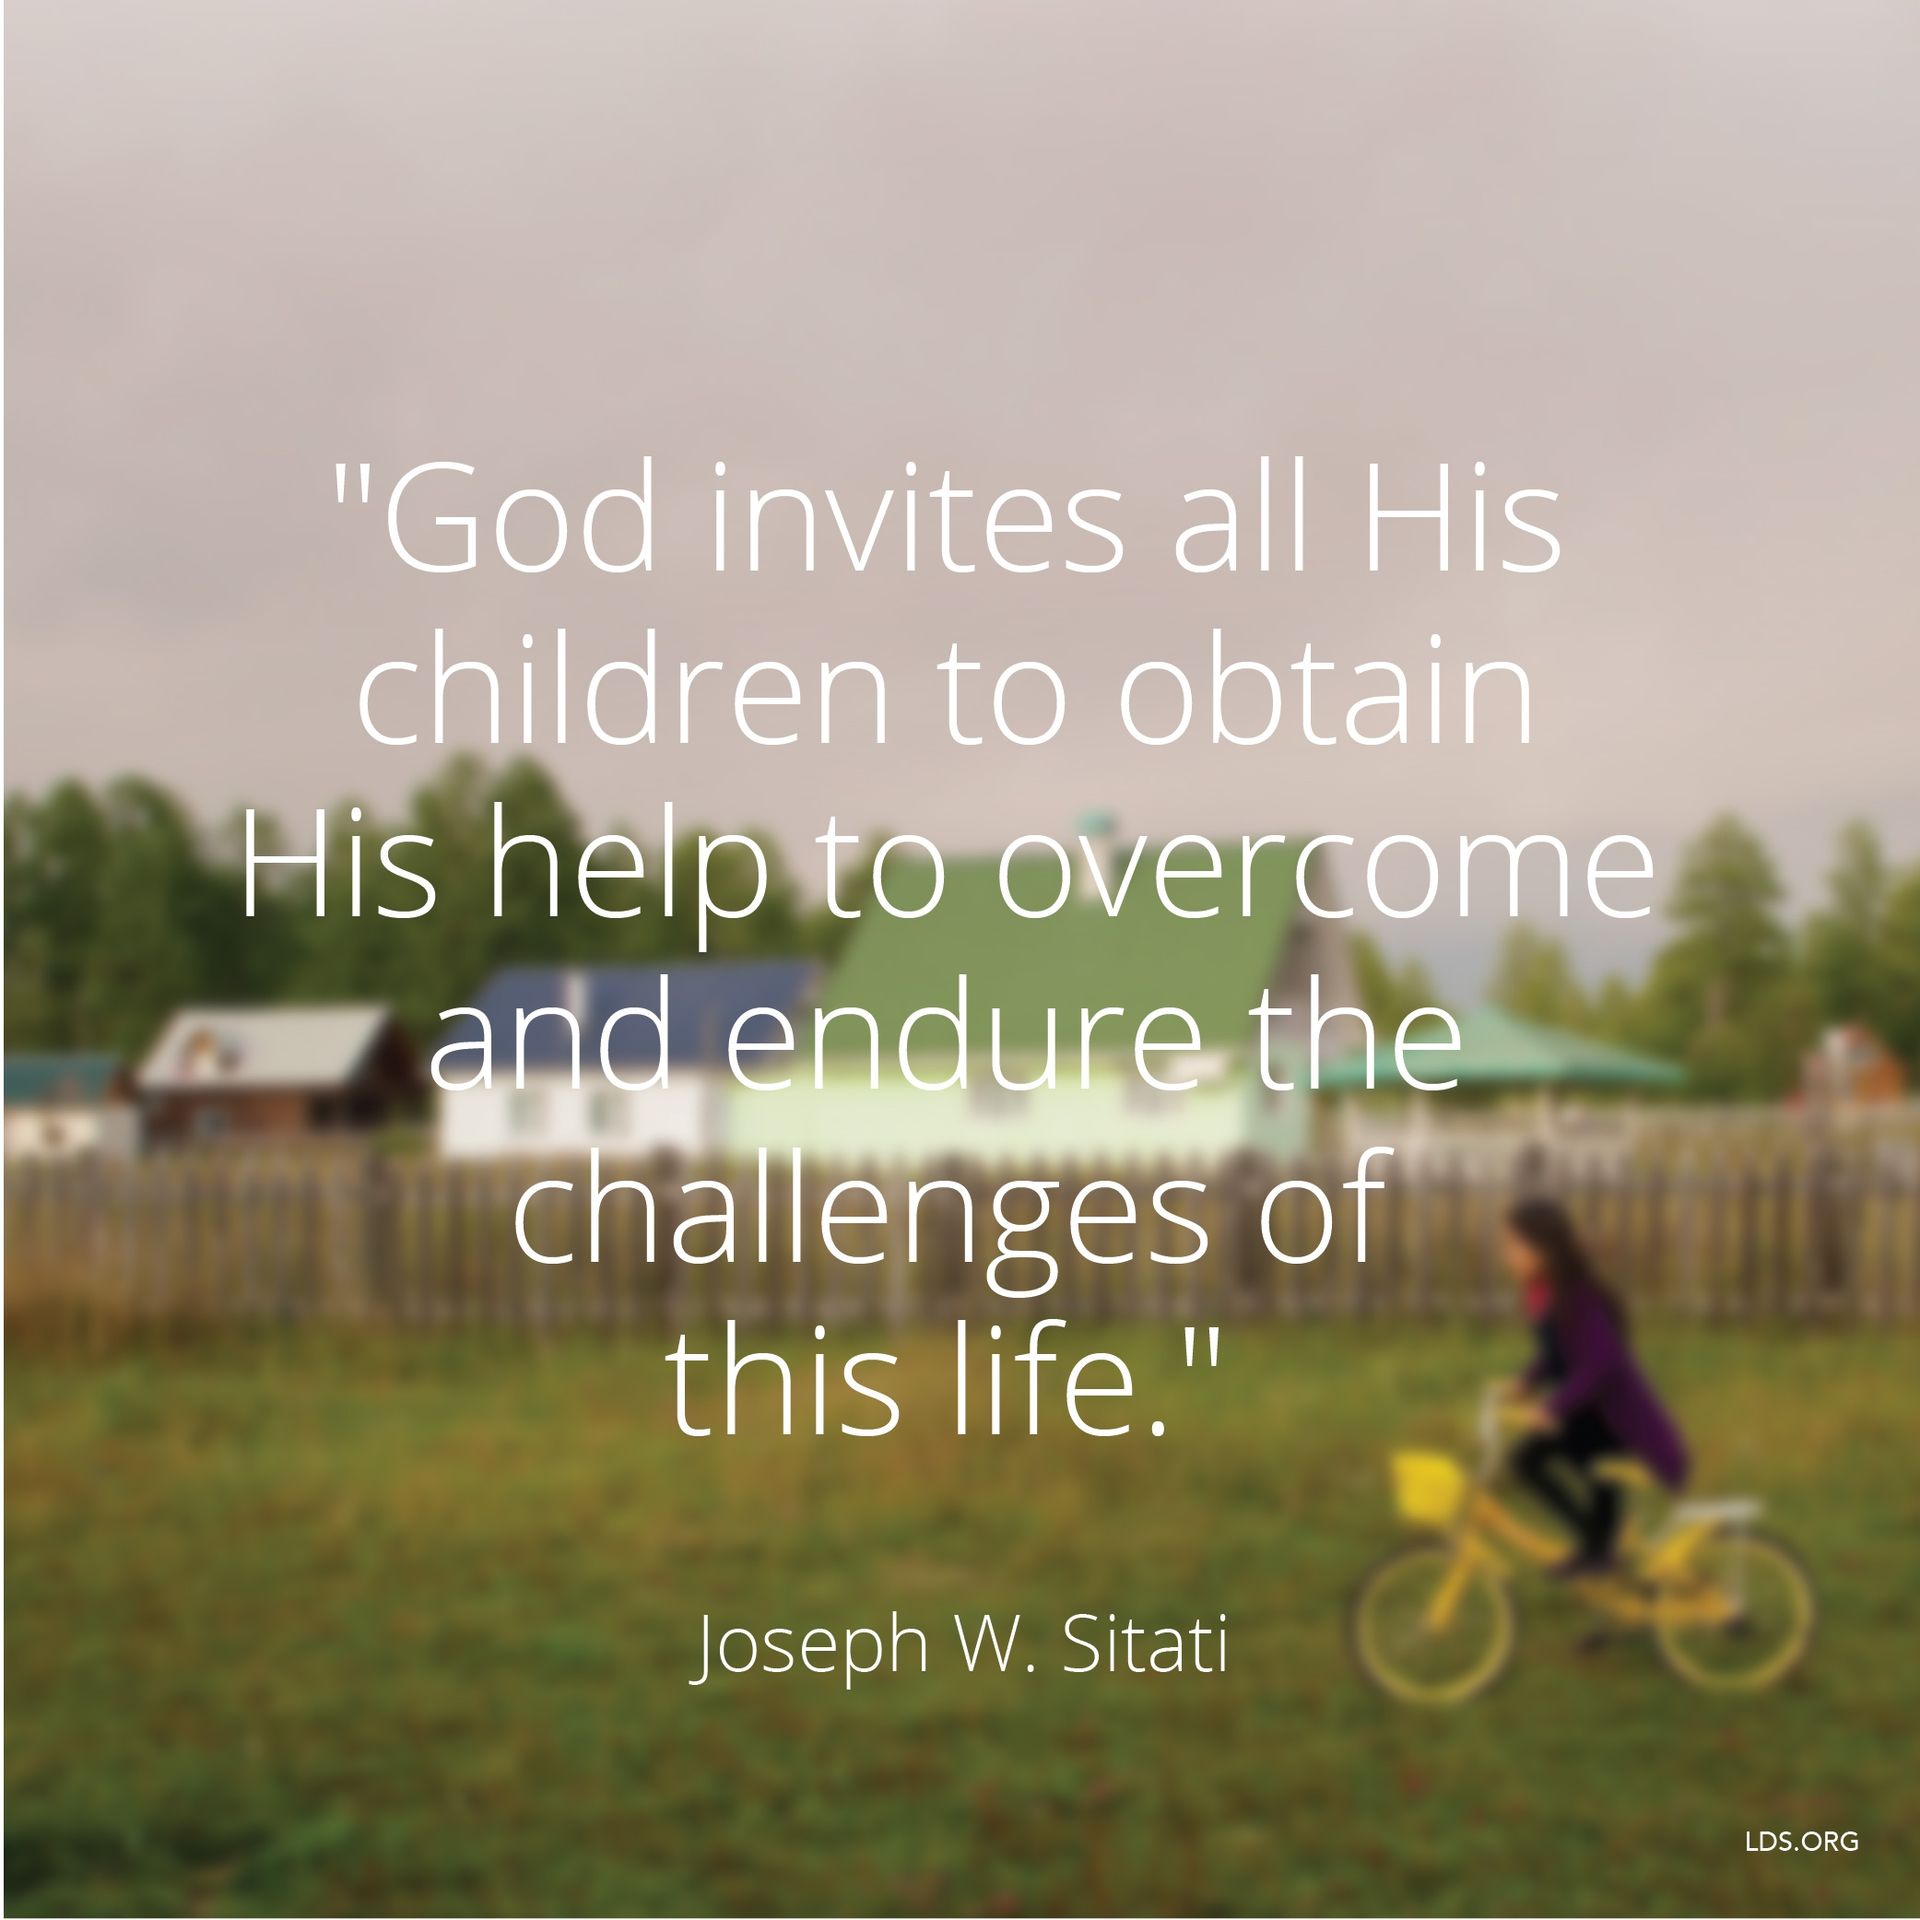 “God invites all His children to obtain His help to overcome and endure the challenges of this life.”—Elder Joseph W. Sitati, “Be Fruitful, Multiply, and Subdue the Earth” © undefined ipCode 1.